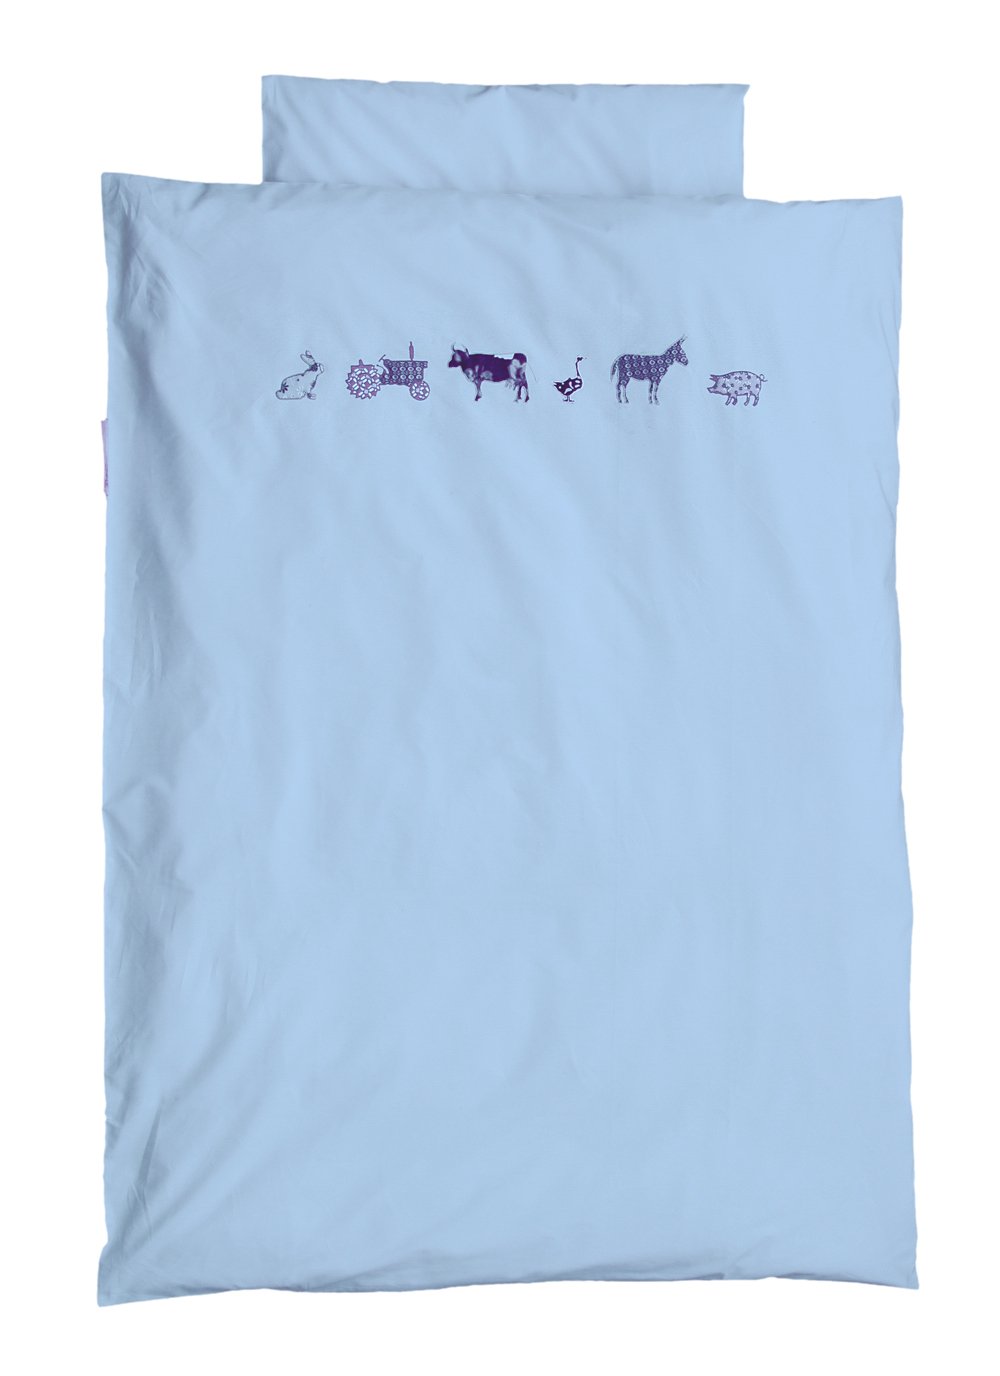 Taftan Ds-442 Tractor Farm Bed Linen Set For Small Bed, 100 X 135 Cm, Avail